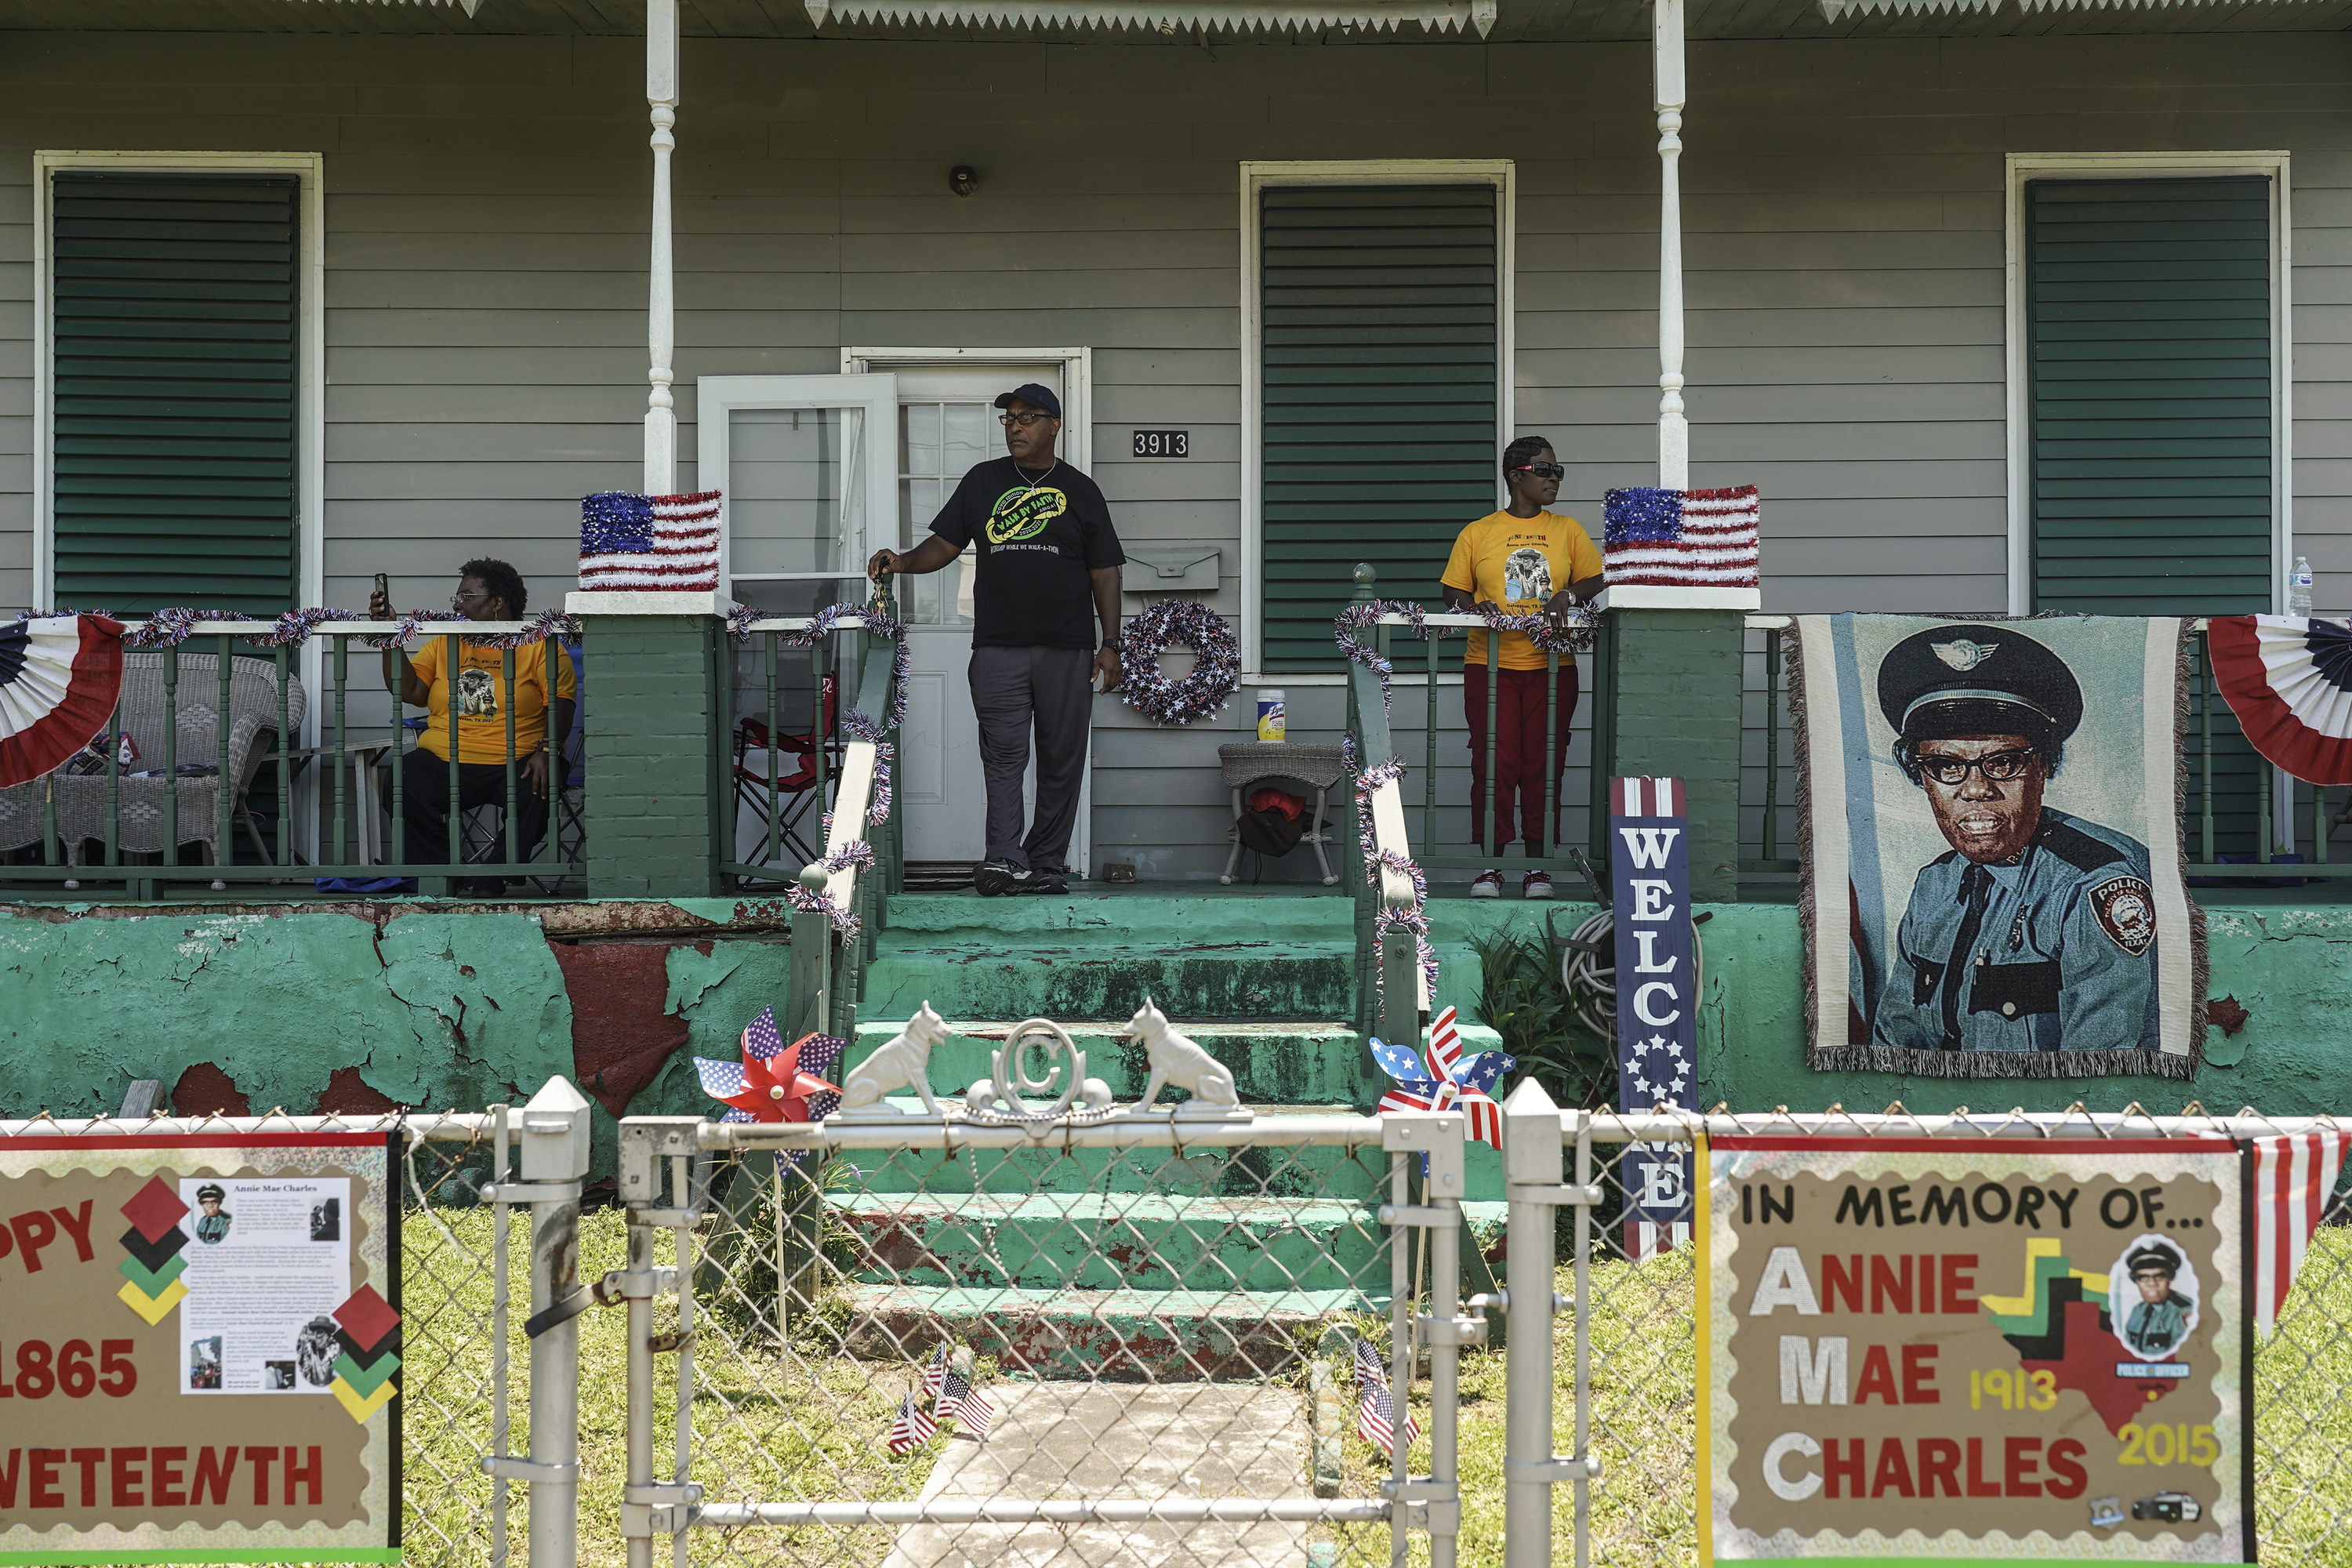 Several people watch from the porch of a house with American flags displayed and commemorative signs. 